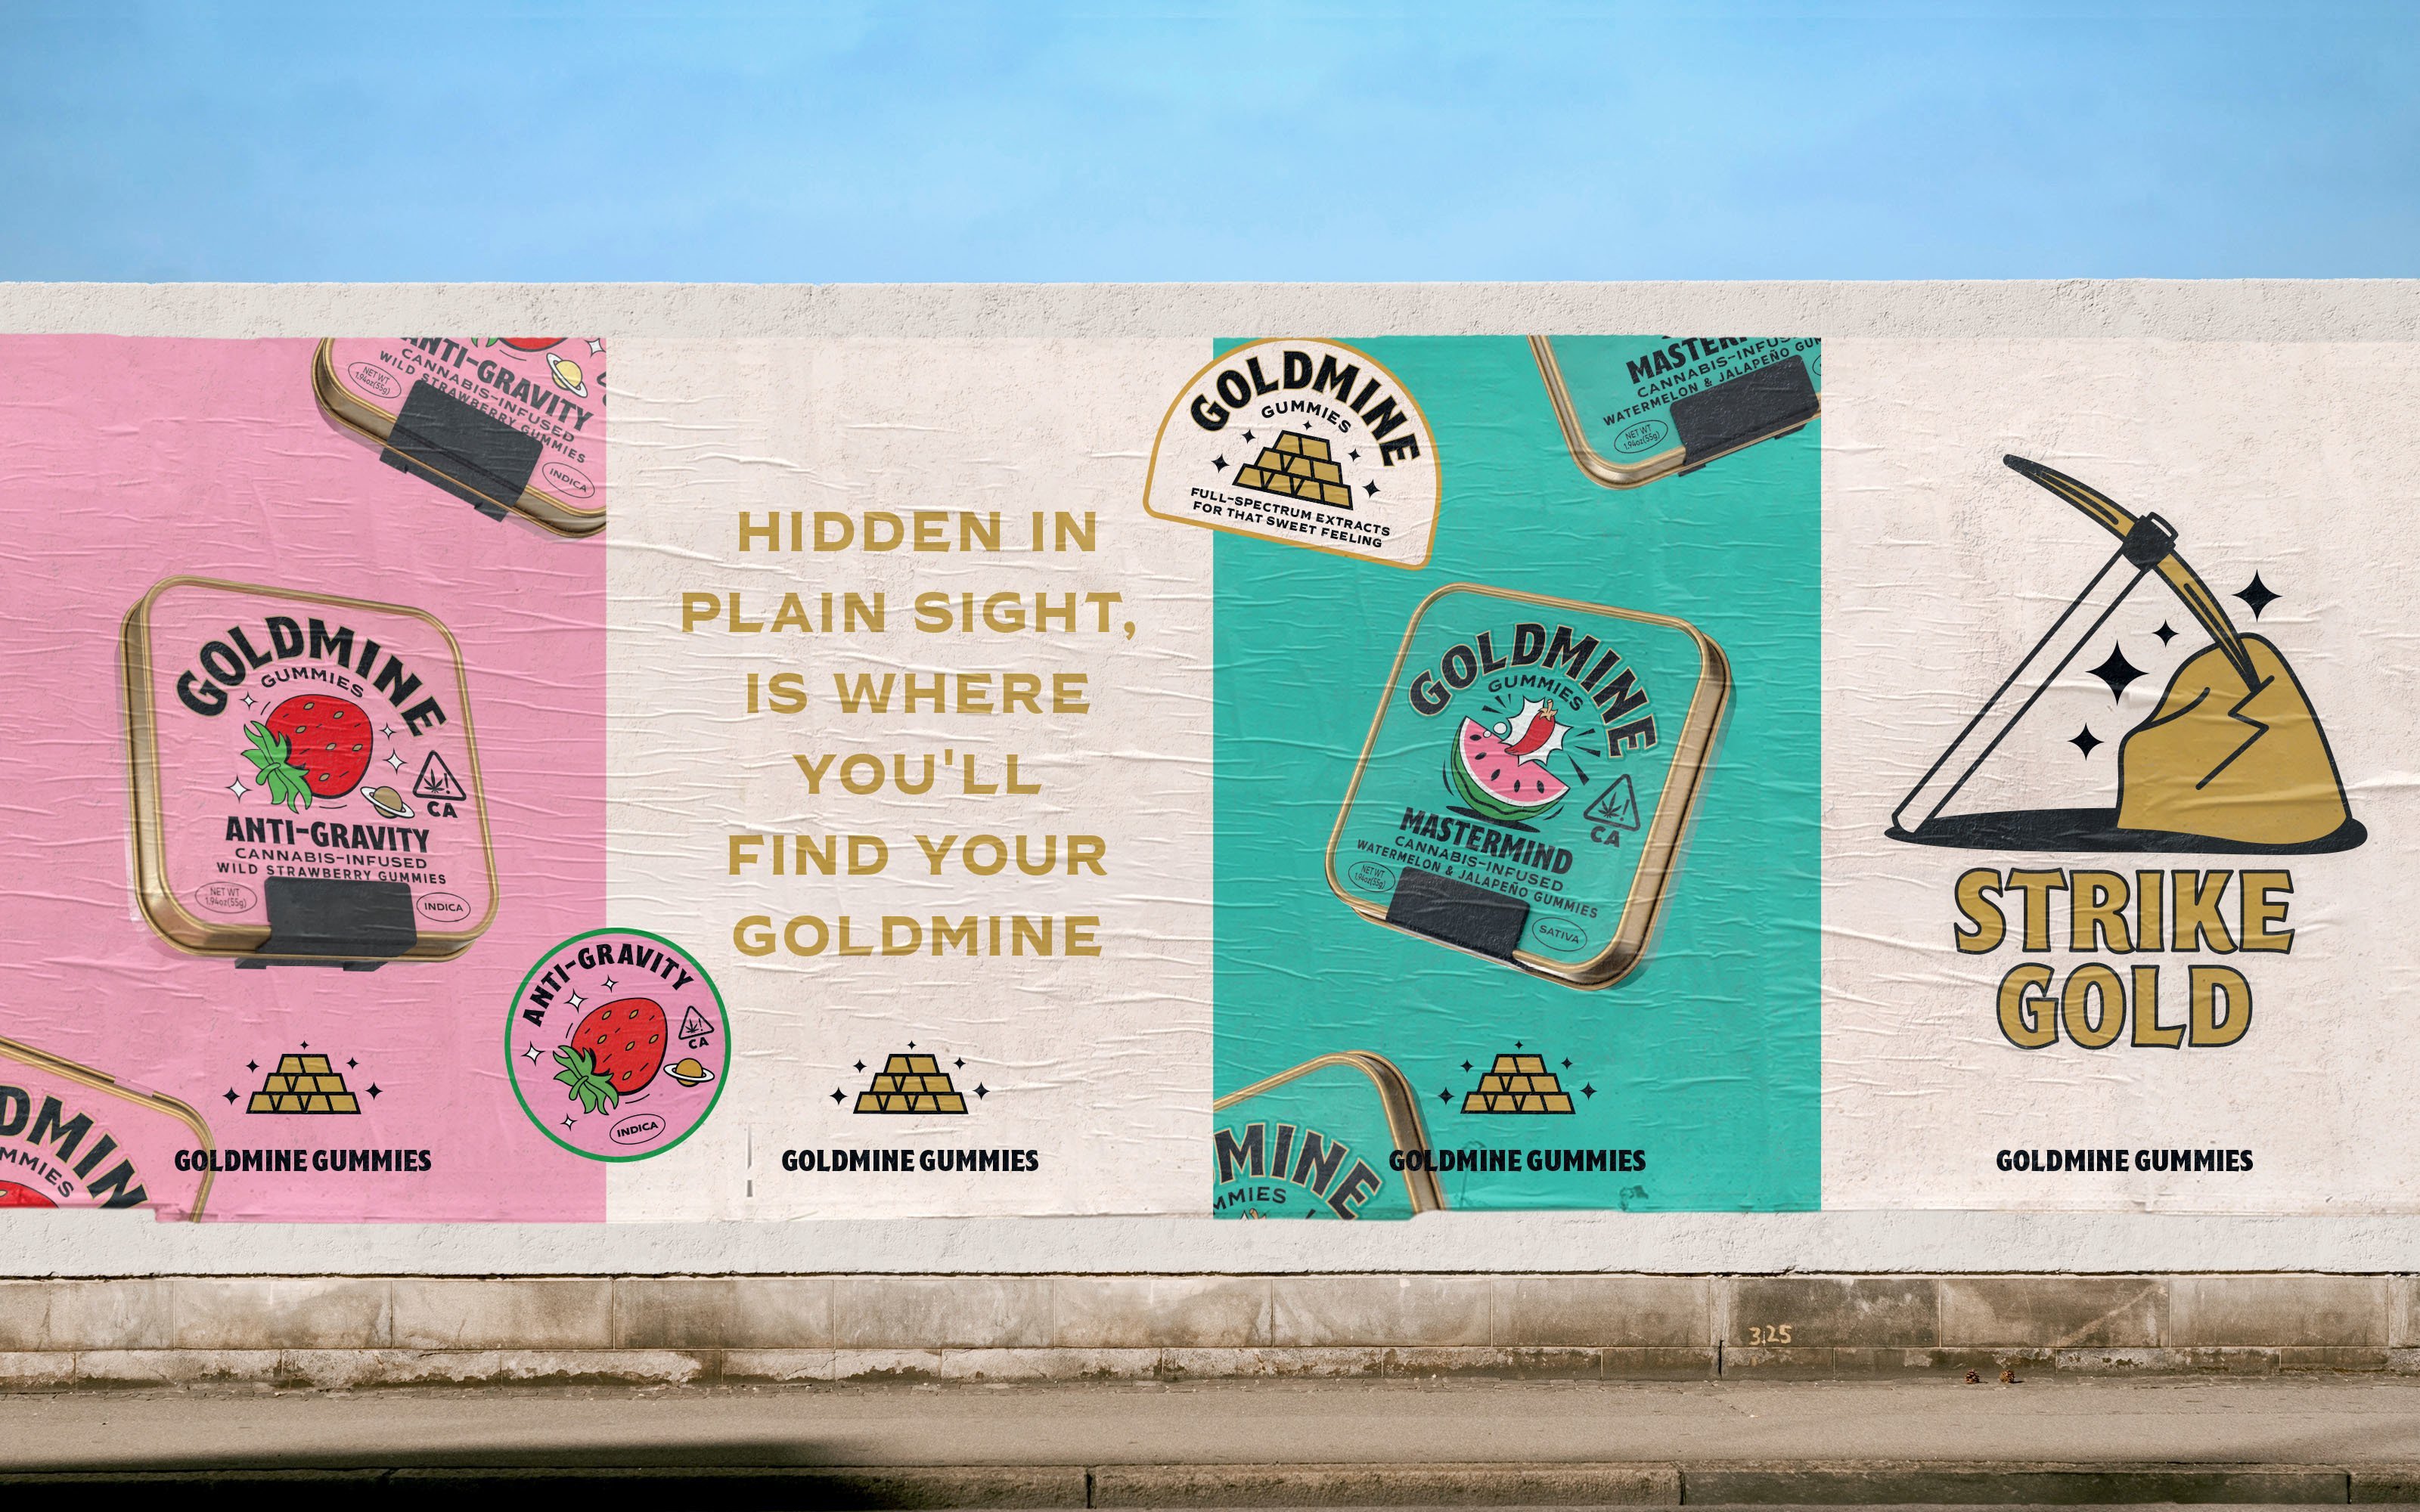 Brand identity, illustration and poster design by Leeds-based Robot Food for Californian cannabis-infused sweets Goldmine Gummies